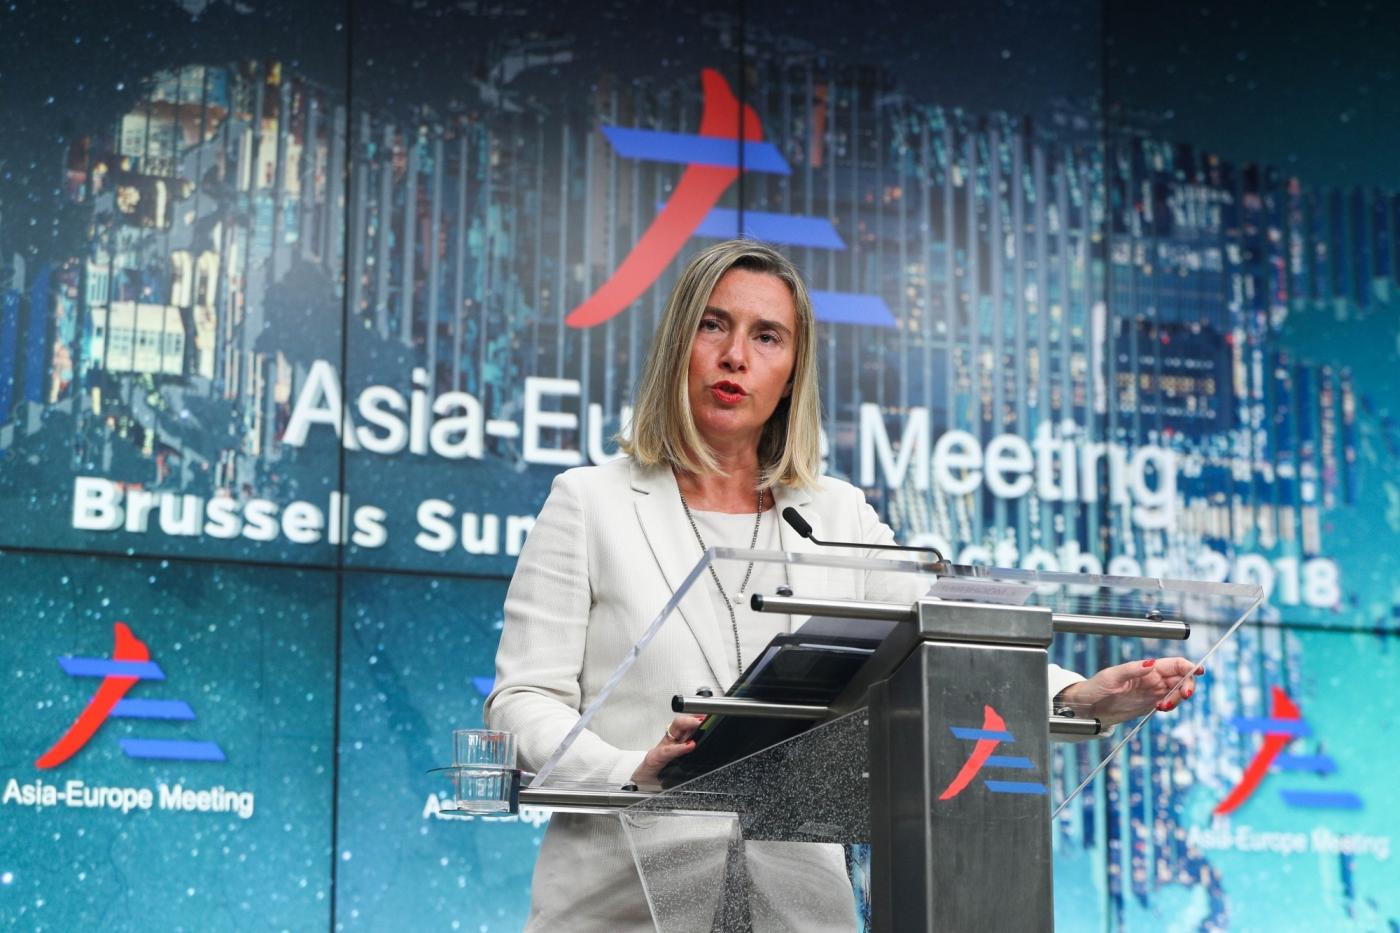 BRUSSELS, Oct. 20, 2018 (Xinhua) -- EU's foreign affairs and security policy chief Federica Mogherini speaks during a press conference of the 12th Asia-Europe Meeting Summit in Brussels, Belgium, Oct. 19, 2018. The two-day Asia-Europe meeting summit wrapped up on Friday in Brussels has called on more connectivity between Europe and Asia. (Xinhua/Zheng Huansong/IANS) by .